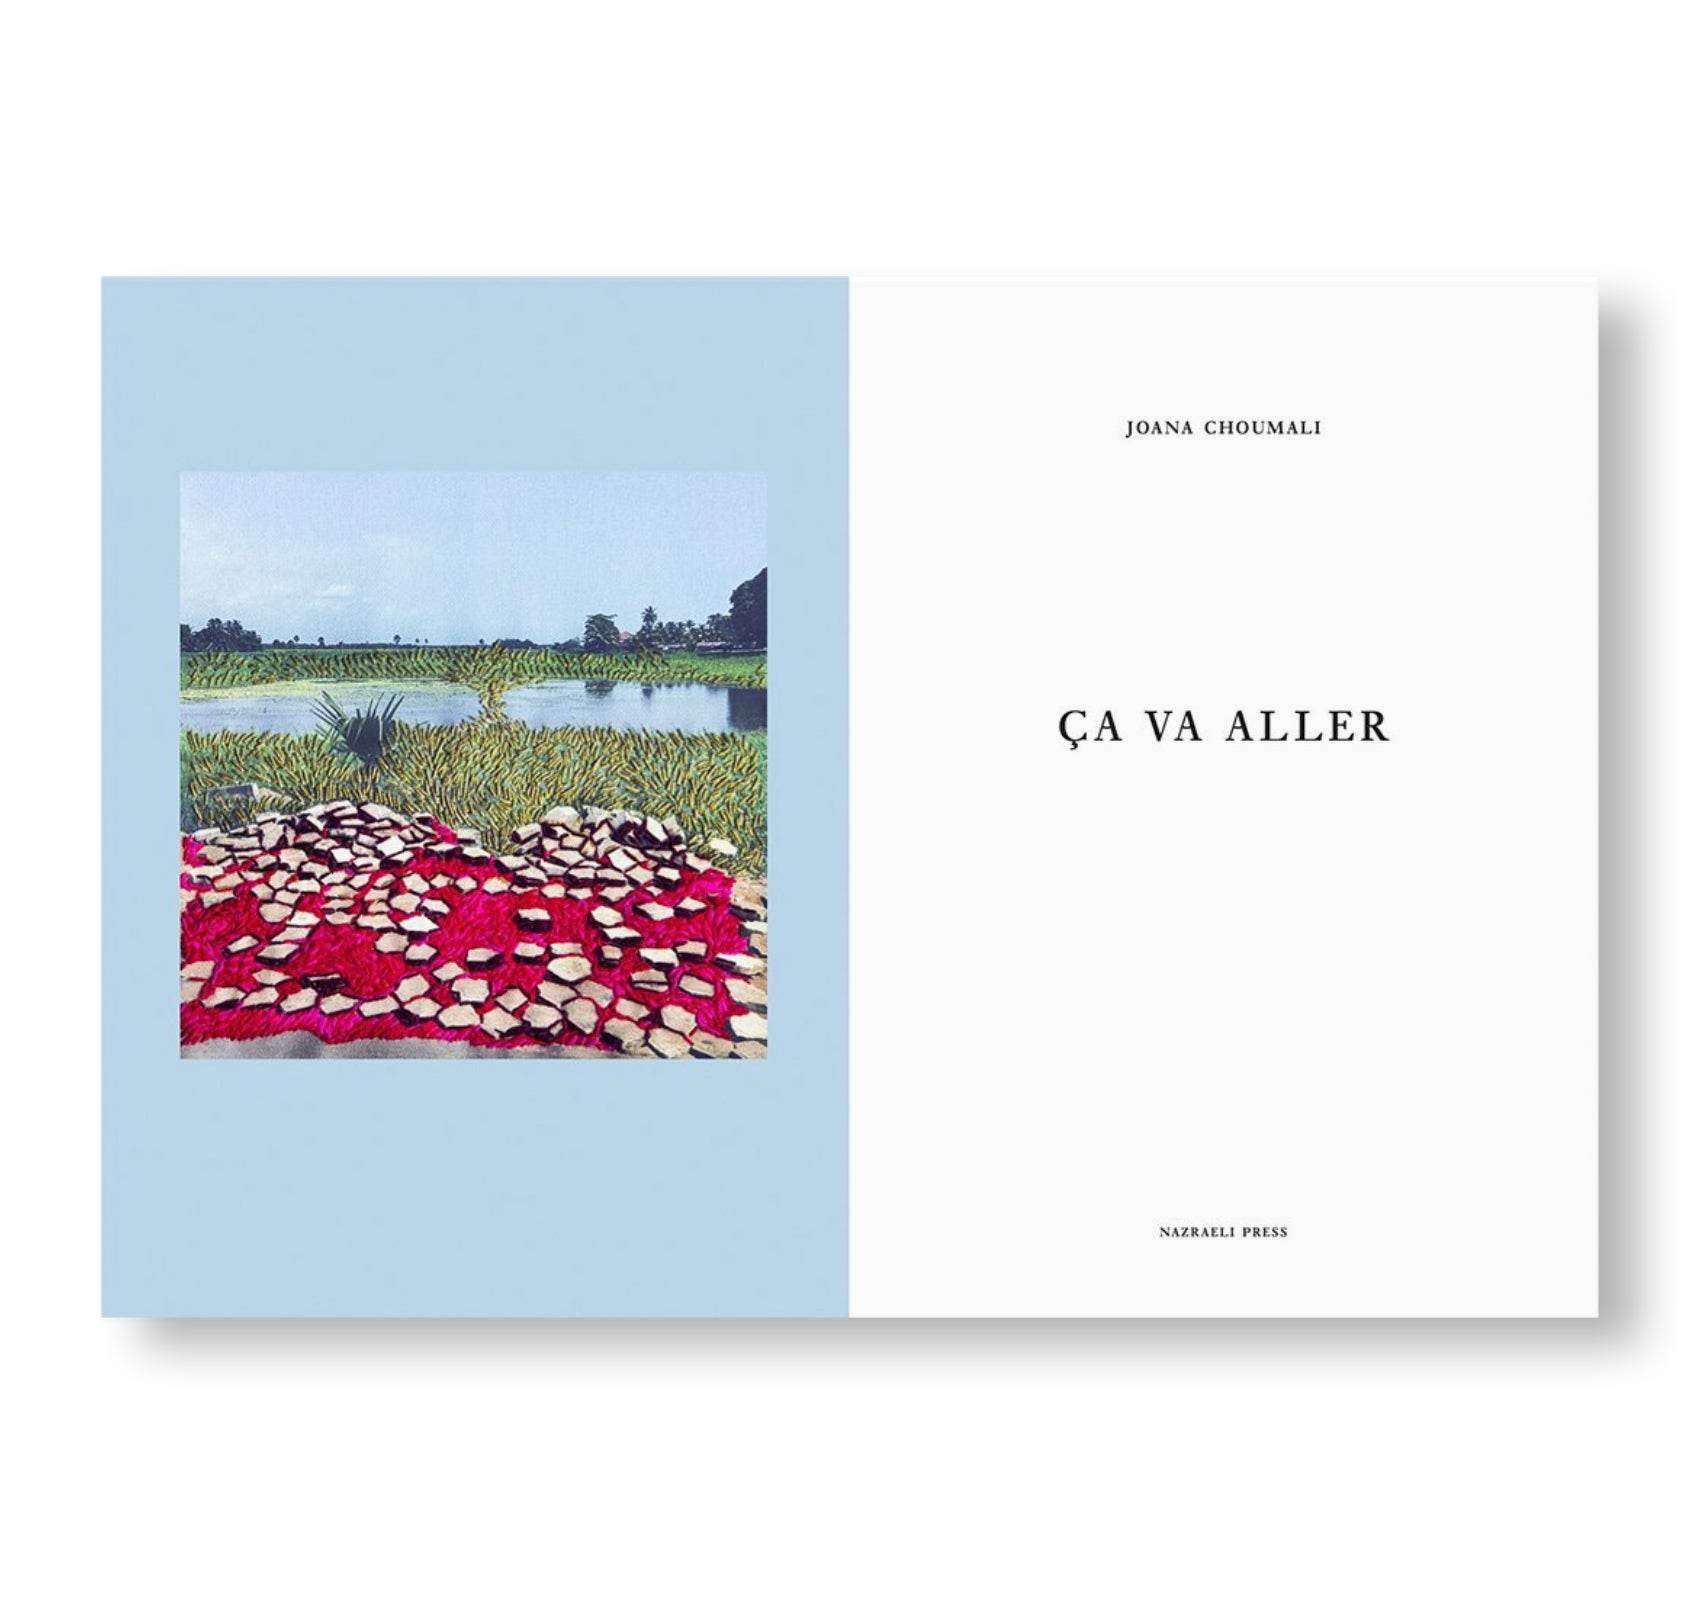 ONE PICTURE BOOK TWO #31: ÇA VA ALLER by Joana Choumali [SPECIAL EDITION]